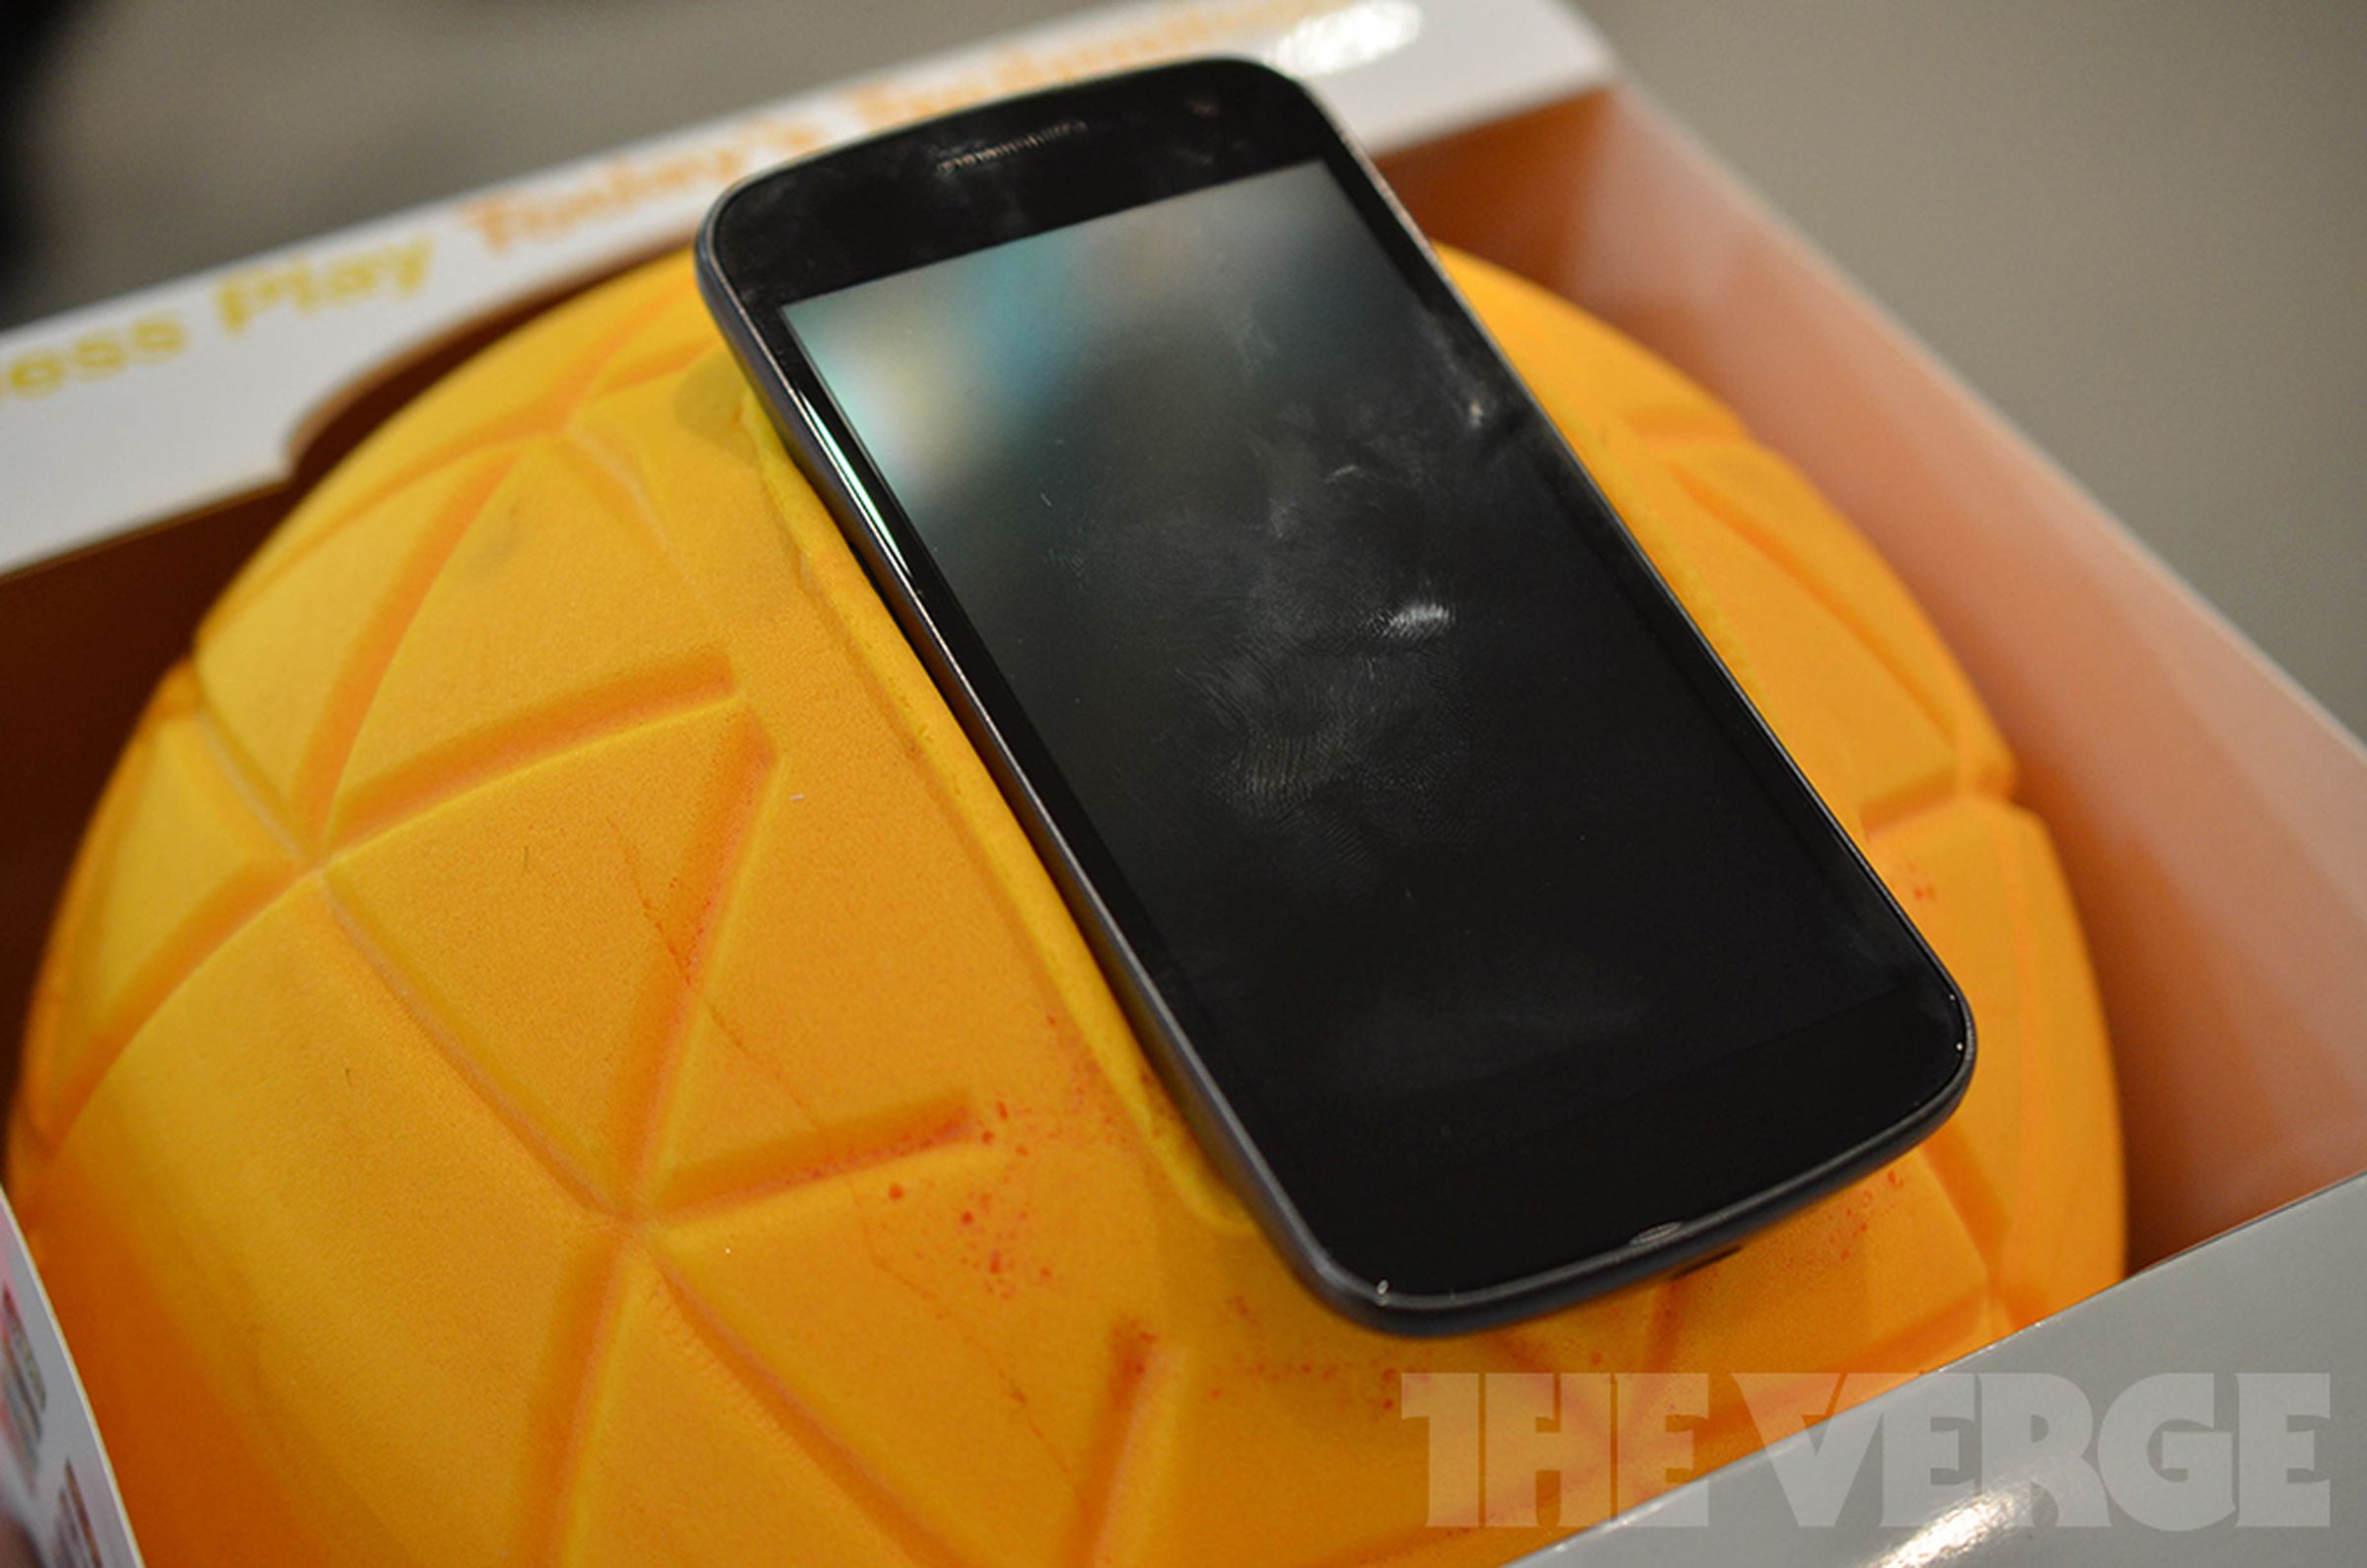 TheO smartphone accessory from Physical Apps (hands-on photos)